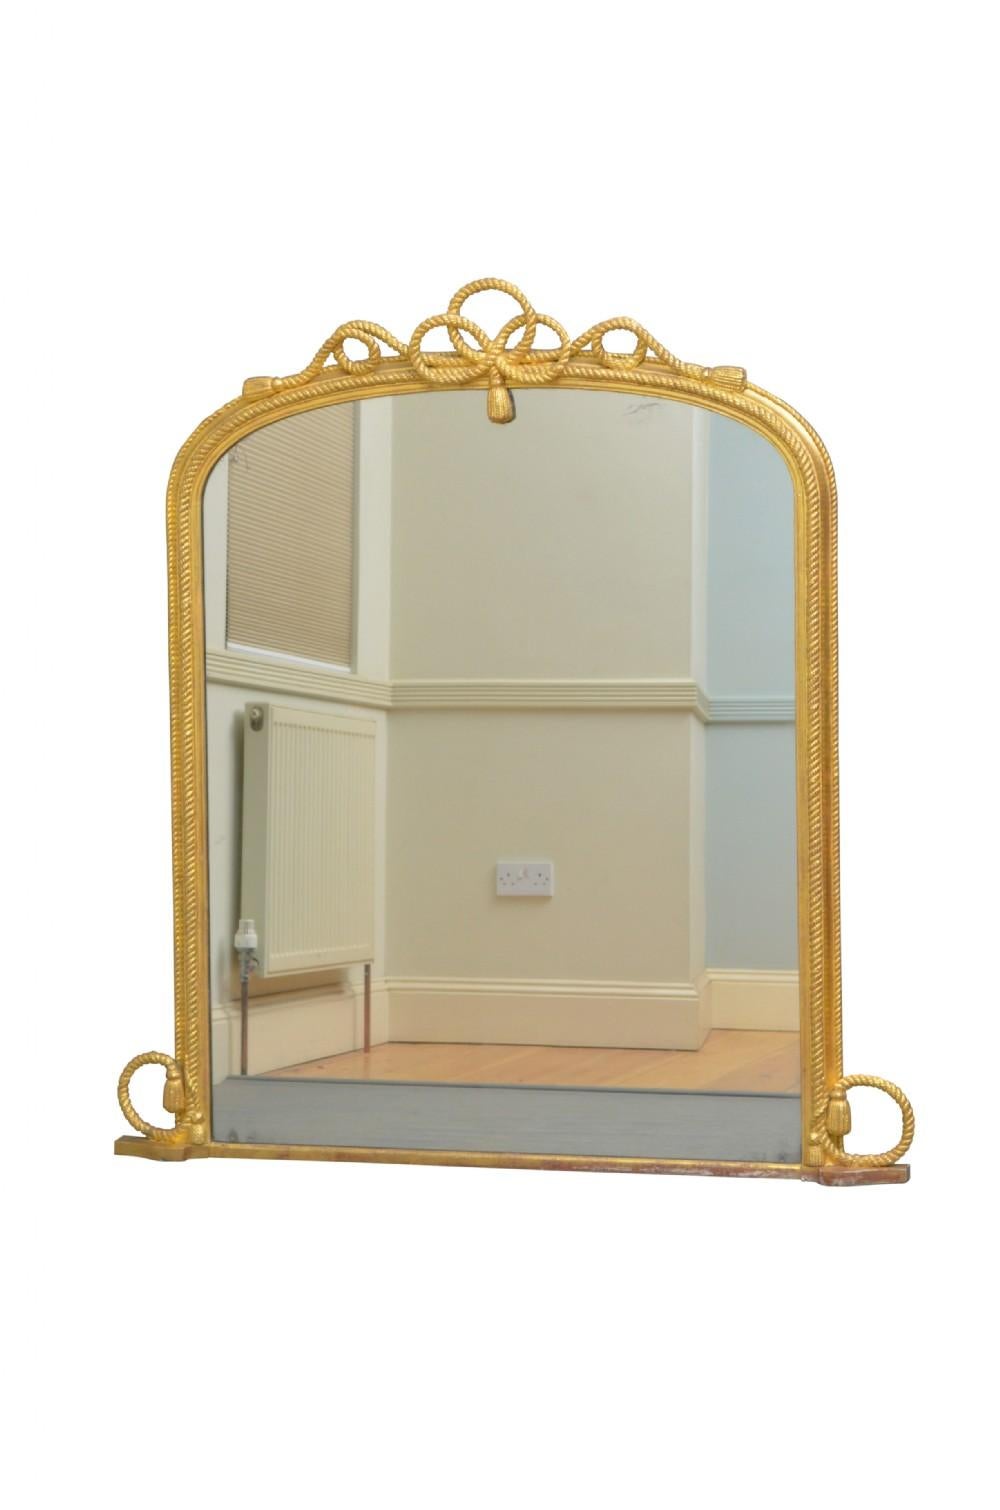 K0428 Stylish Victorian gilded wall mirror, having original glass with some foxing in gilded frame with rope decoration throughout. This overmantel mirror retains original glass, gilt and backboards. Ready to place at home. c1880
Measures: H56